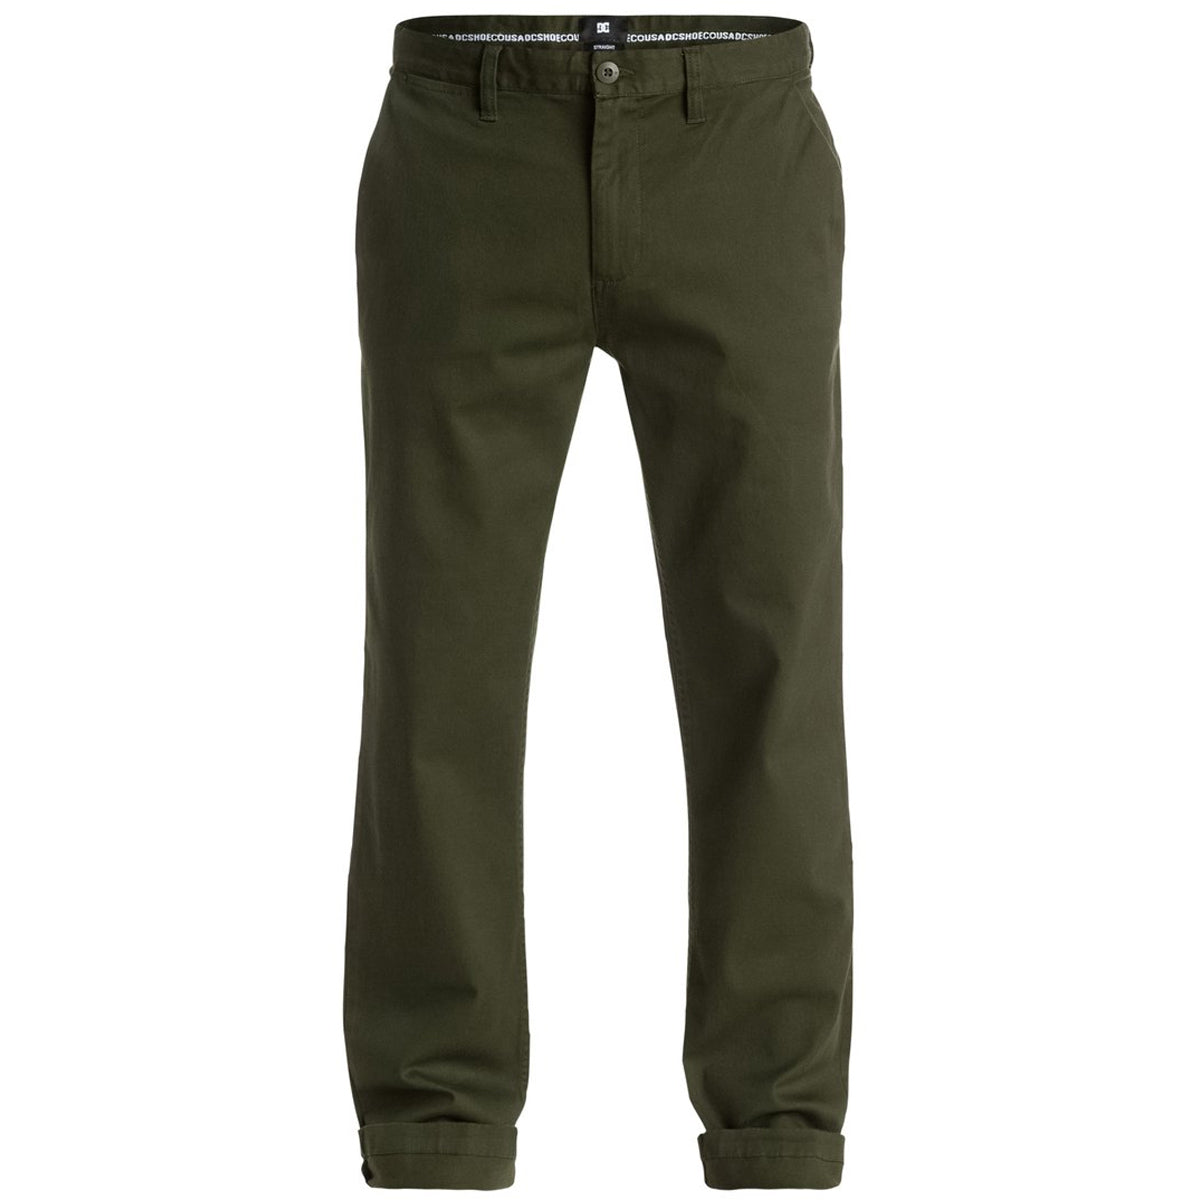 DC Worker Staright 32" Men's Chino Pants - Fatigue Green